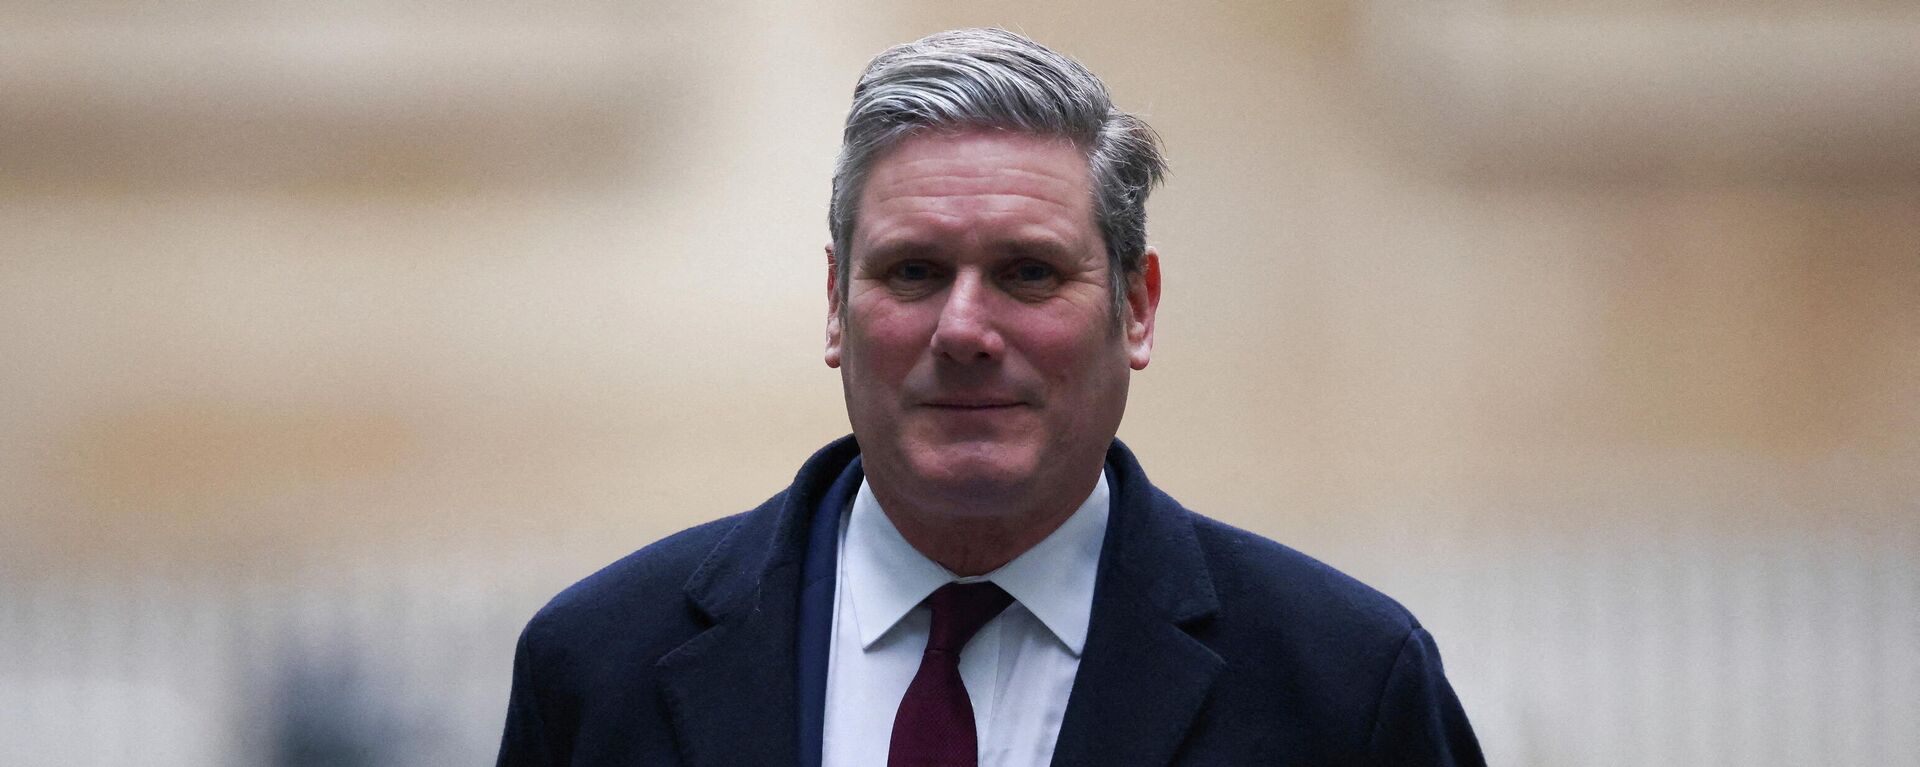 FILE PHOTO: British Labour Party leader Keir Starmer arrives at the BBC Headquarters in London - Sputnik International, 1920, 14.02.2022